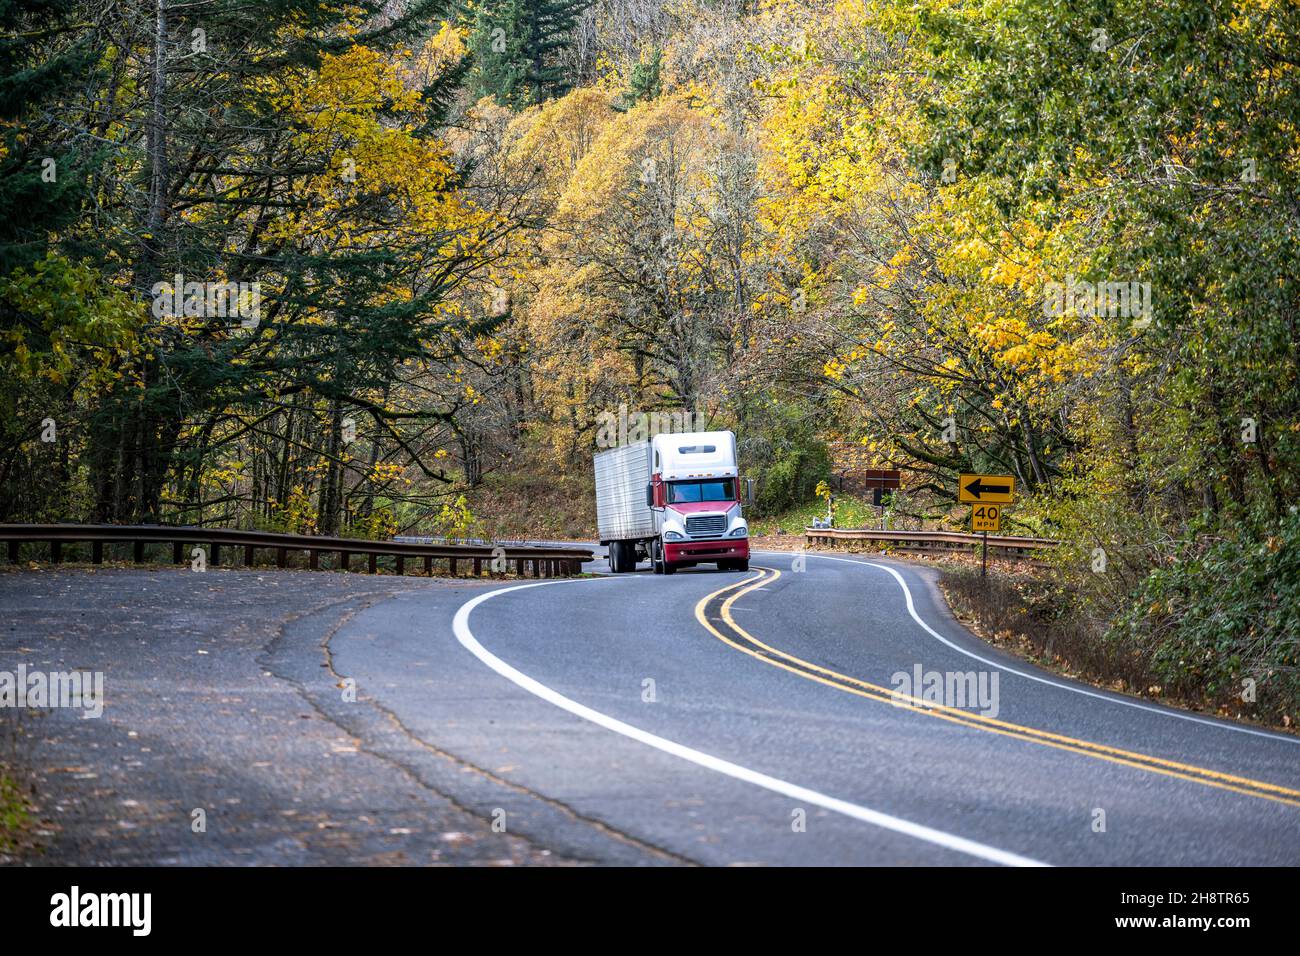 Industrial big rig white and red semi truck tractor transporting commercial cargo in refrigerator semi trailer driving on the narrow winding road with Stock Photo